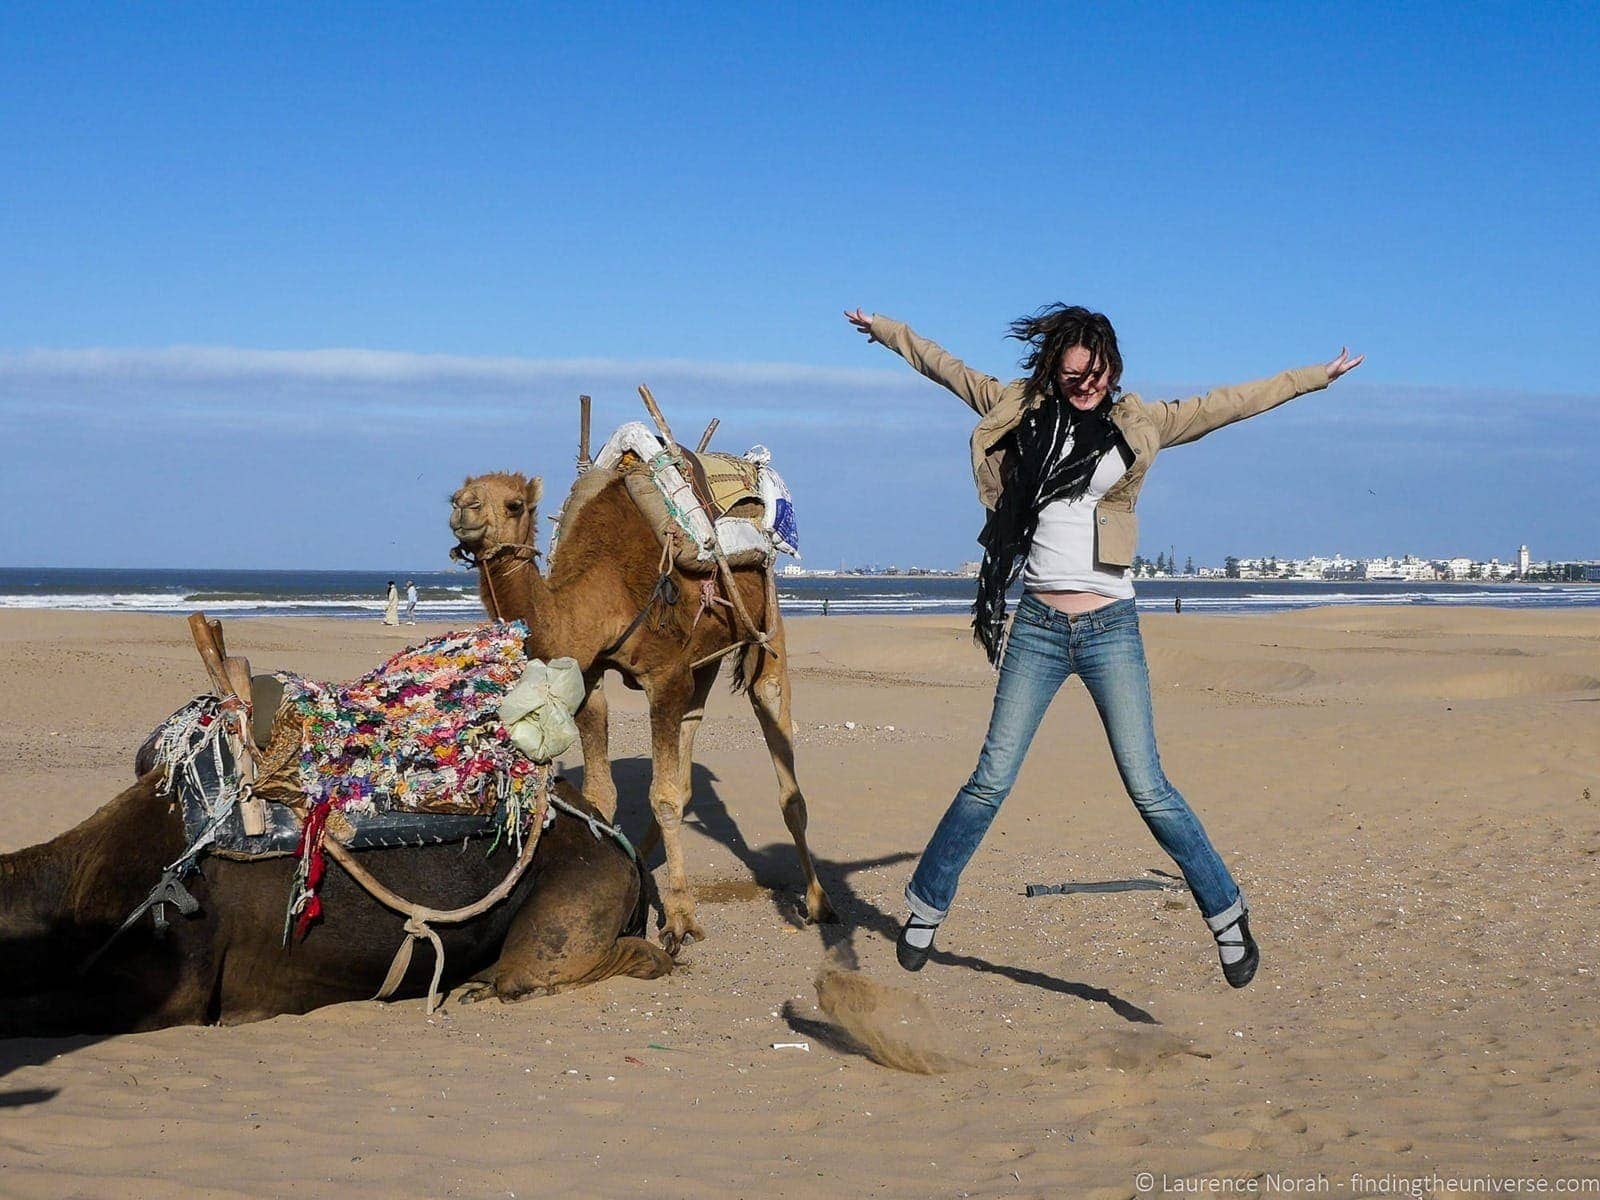 Jumping in front of a camel Morocco